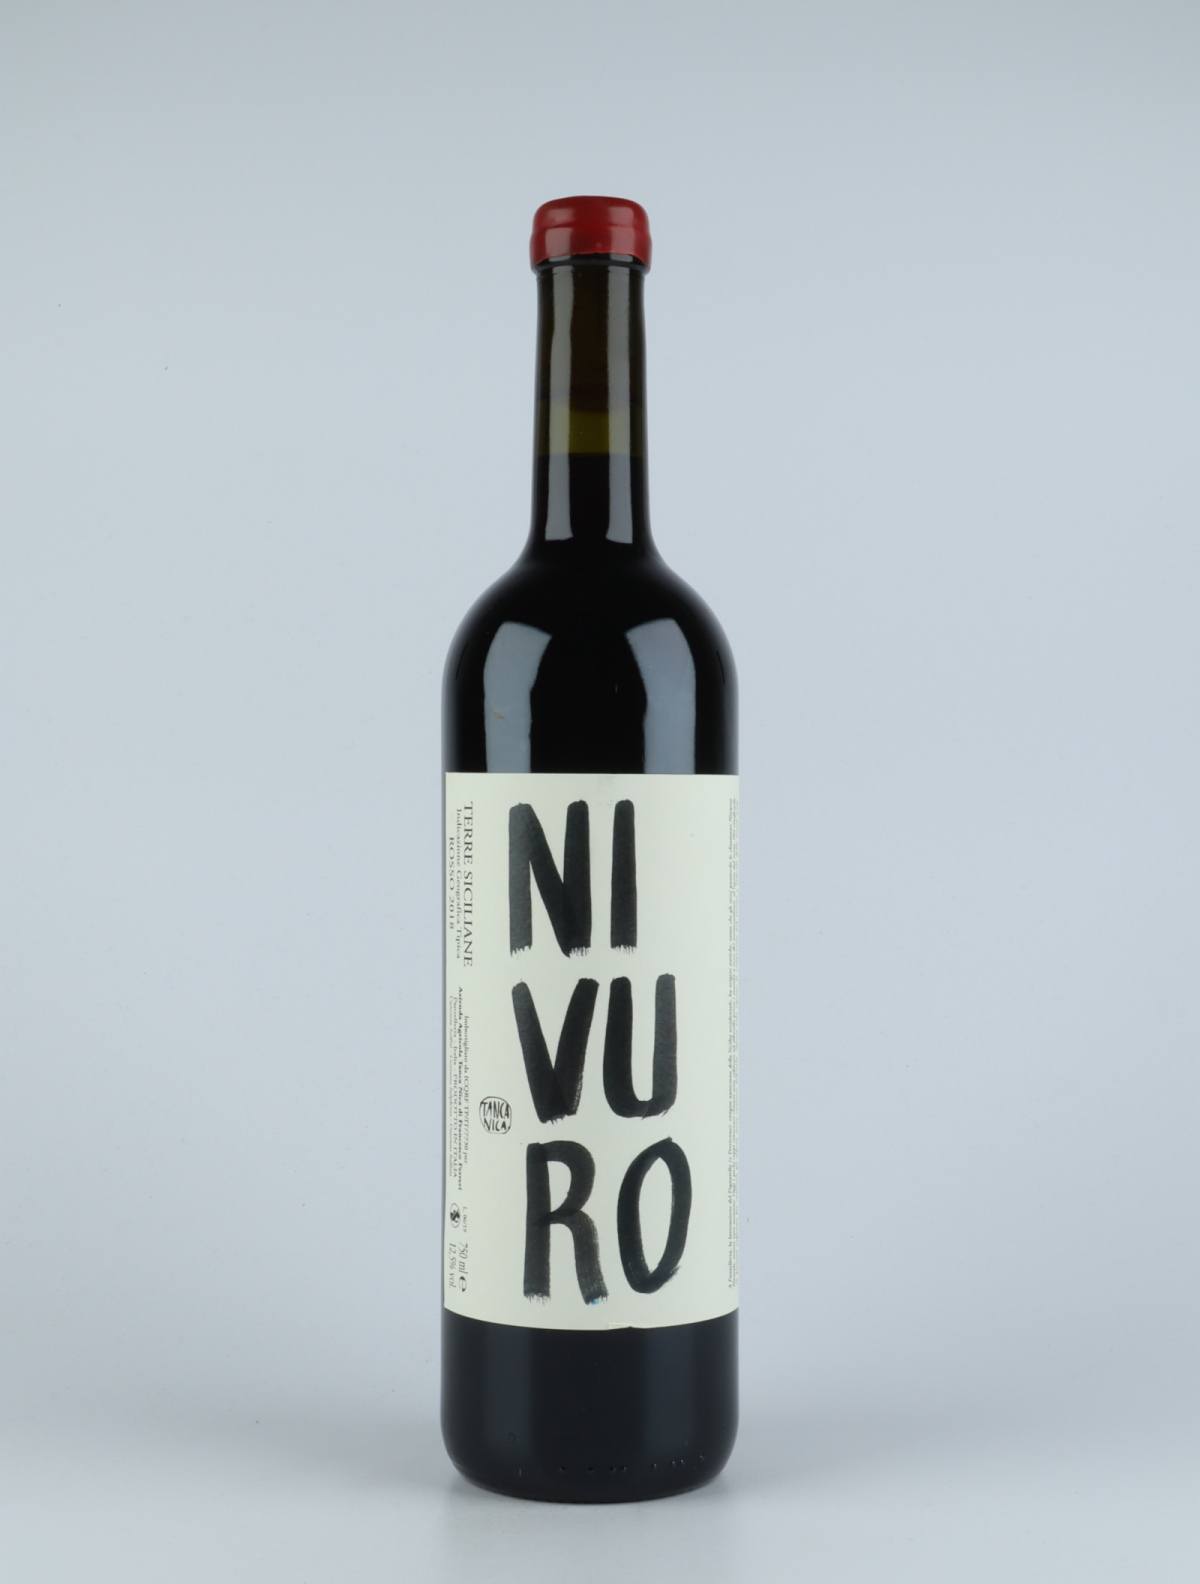 A bottle 2018 Nivuro Nostrale Red wine from Tanca Nica, Sicily in Italy